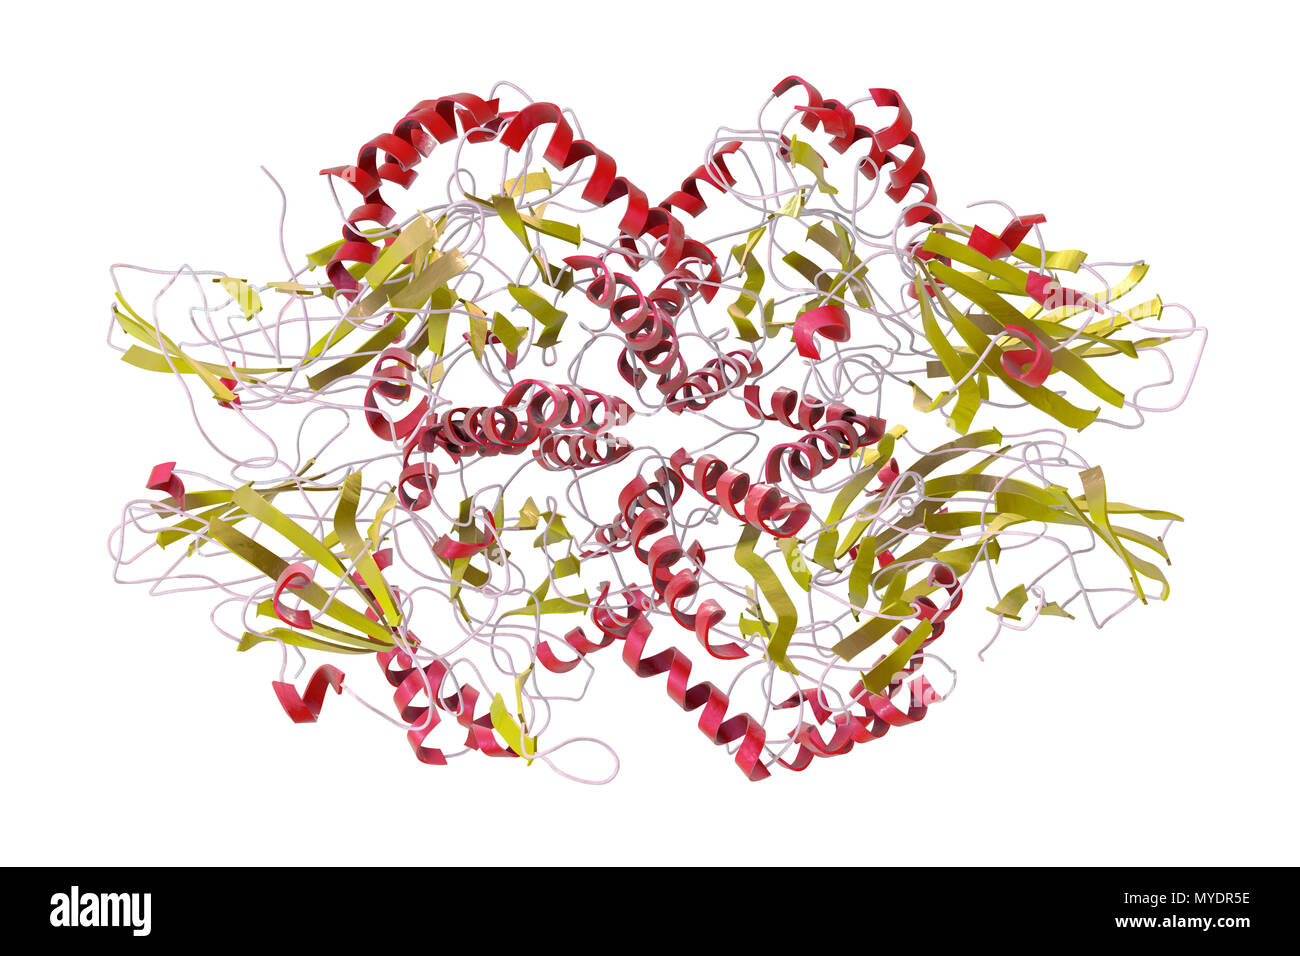 Human beta-glucuronidase molecule, computer illustration. This enzyme has multiple biological functions. It is involved in the development of prostate and other cancers. Stock Photo